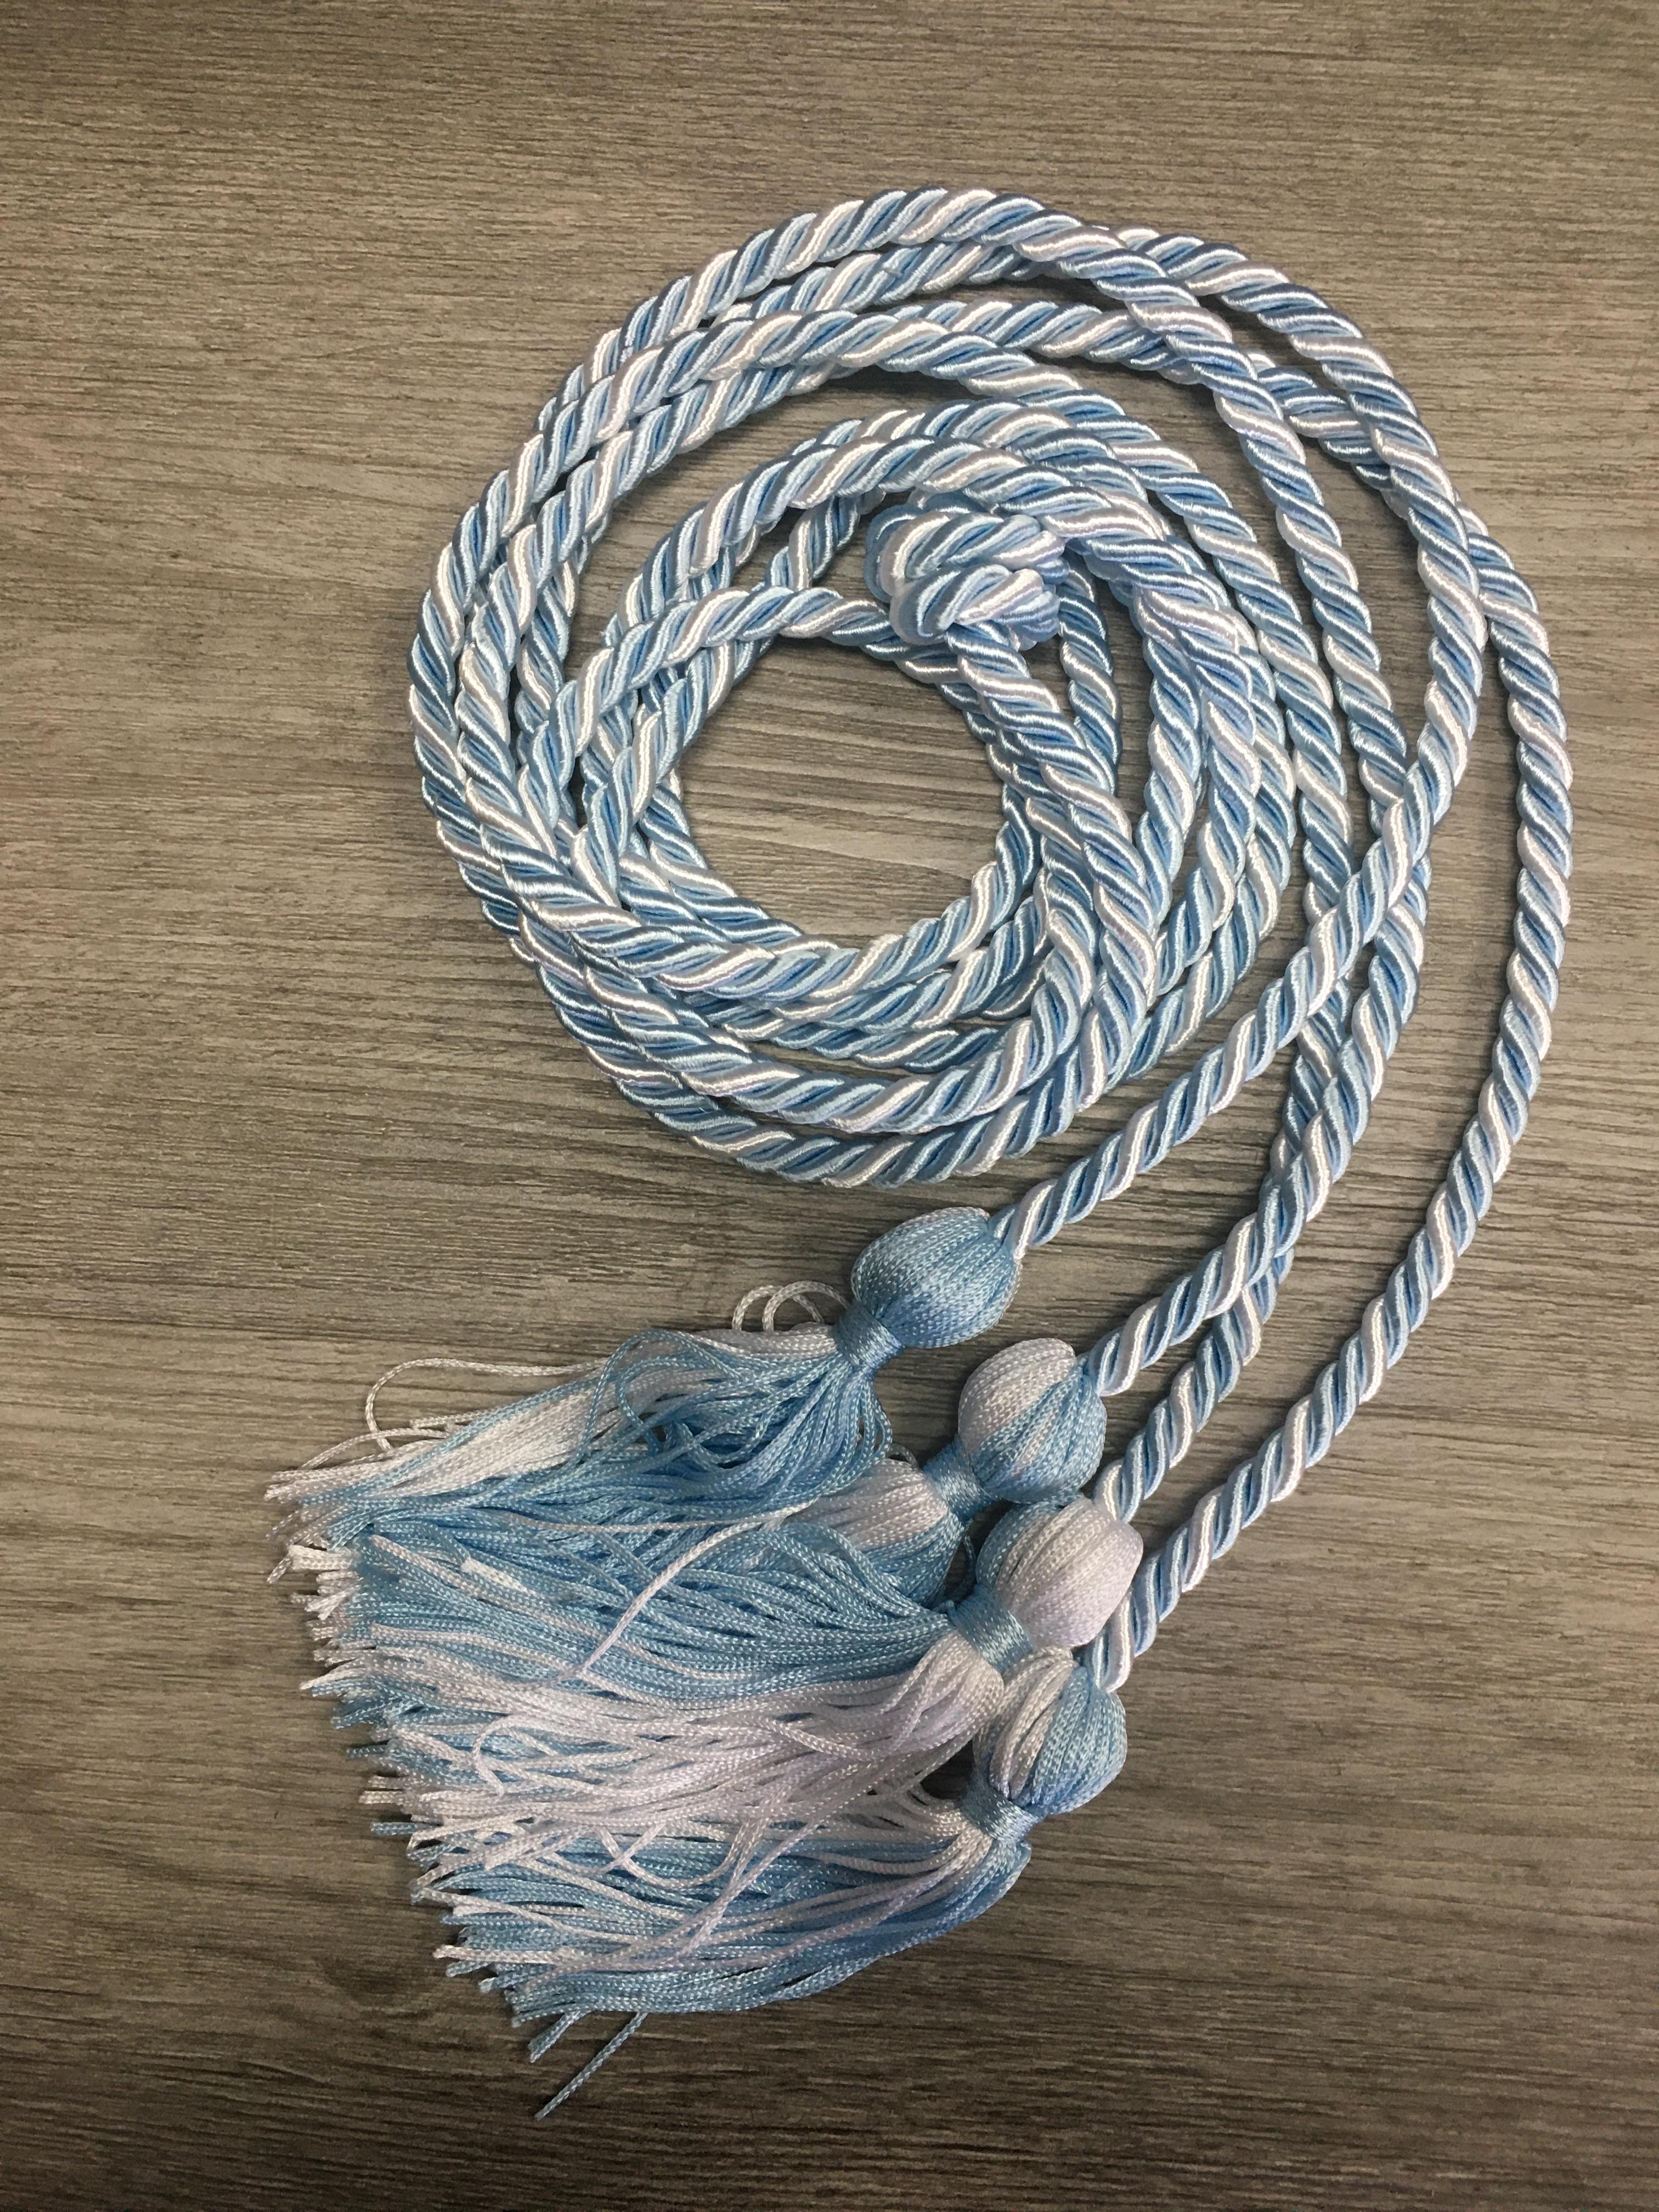 Sky Blue and White Intertwined Cords